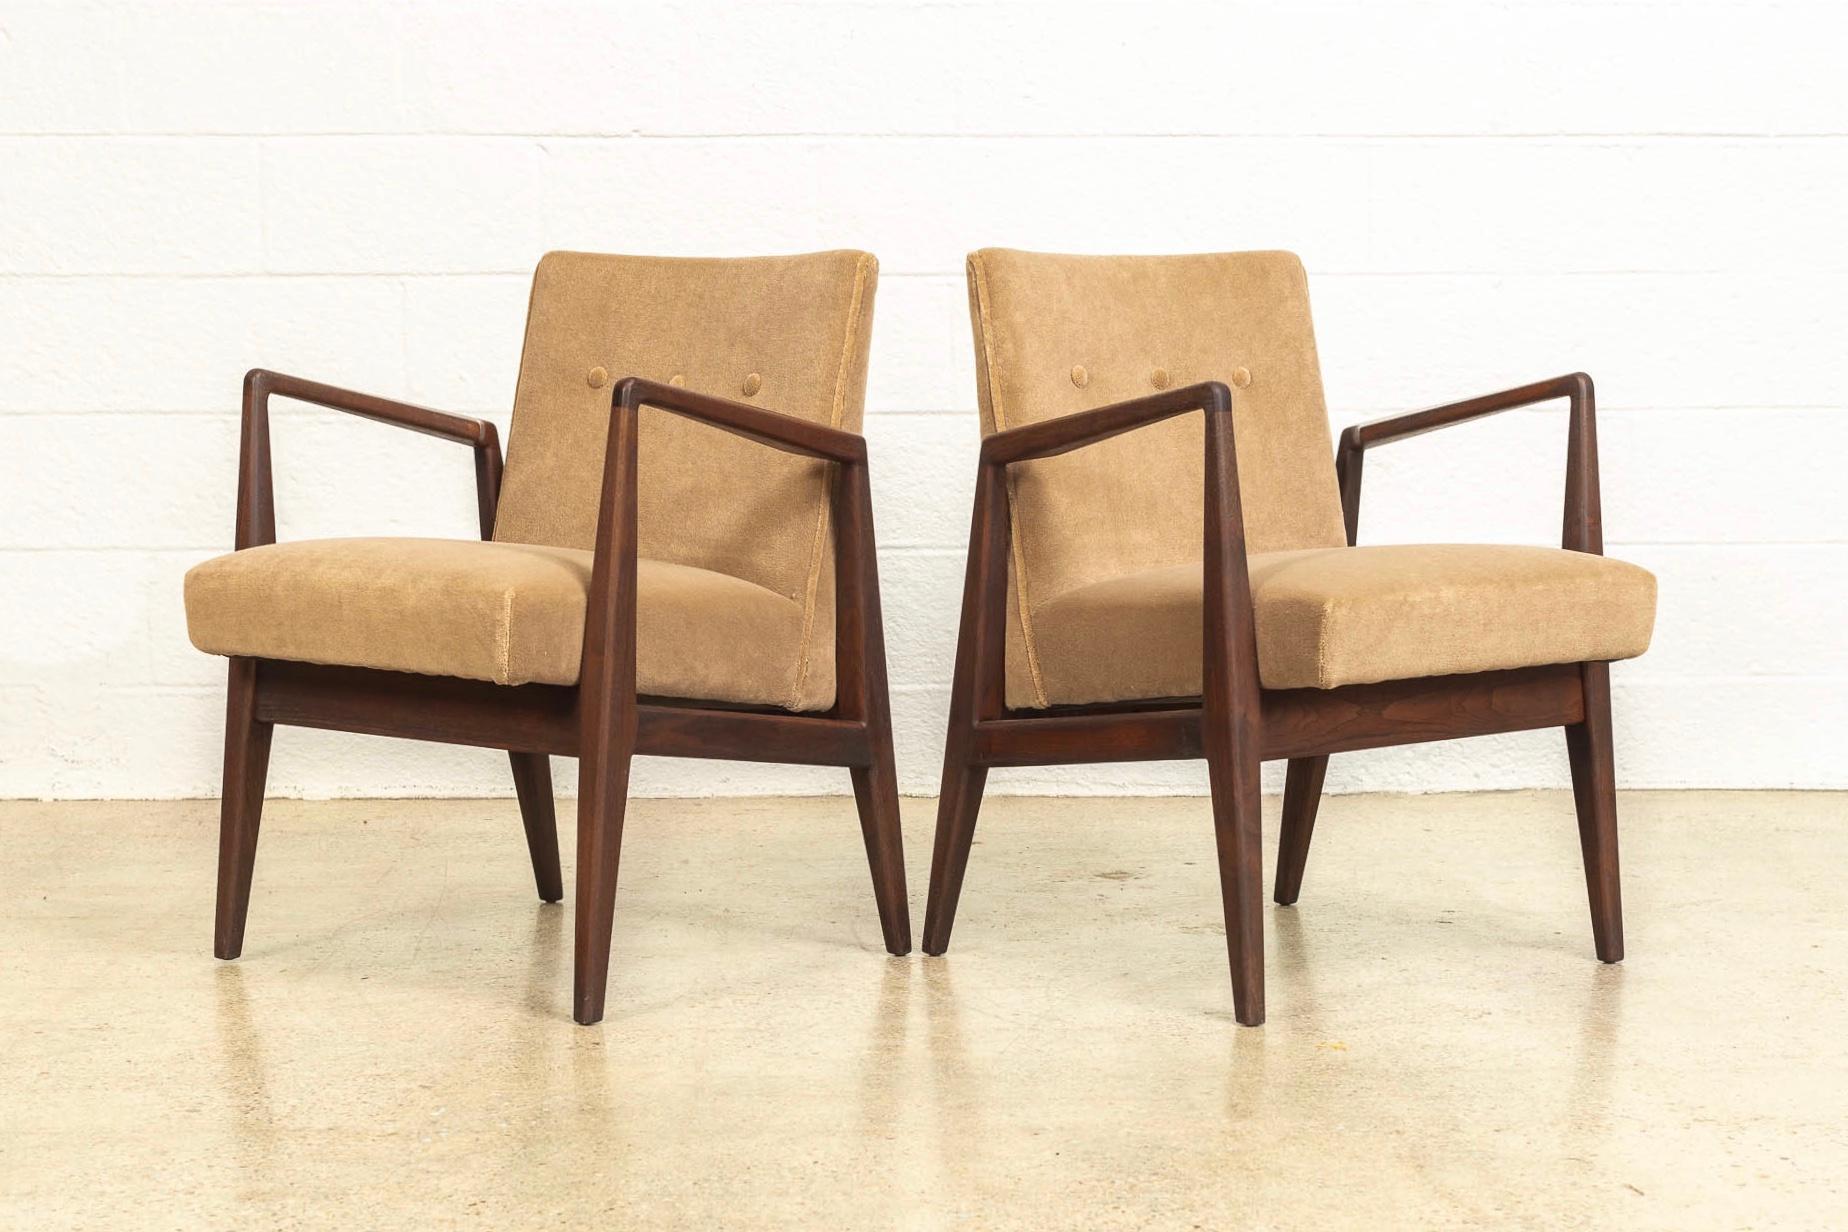 This pair of vintage Mid-Century Modern lounge chairs designed by Jens Risom are circa 1960. The iconic Classic Danish modern-inspired design features clean, Minimalist lines and distinctive angles. This set features a beautiful sculptural solid